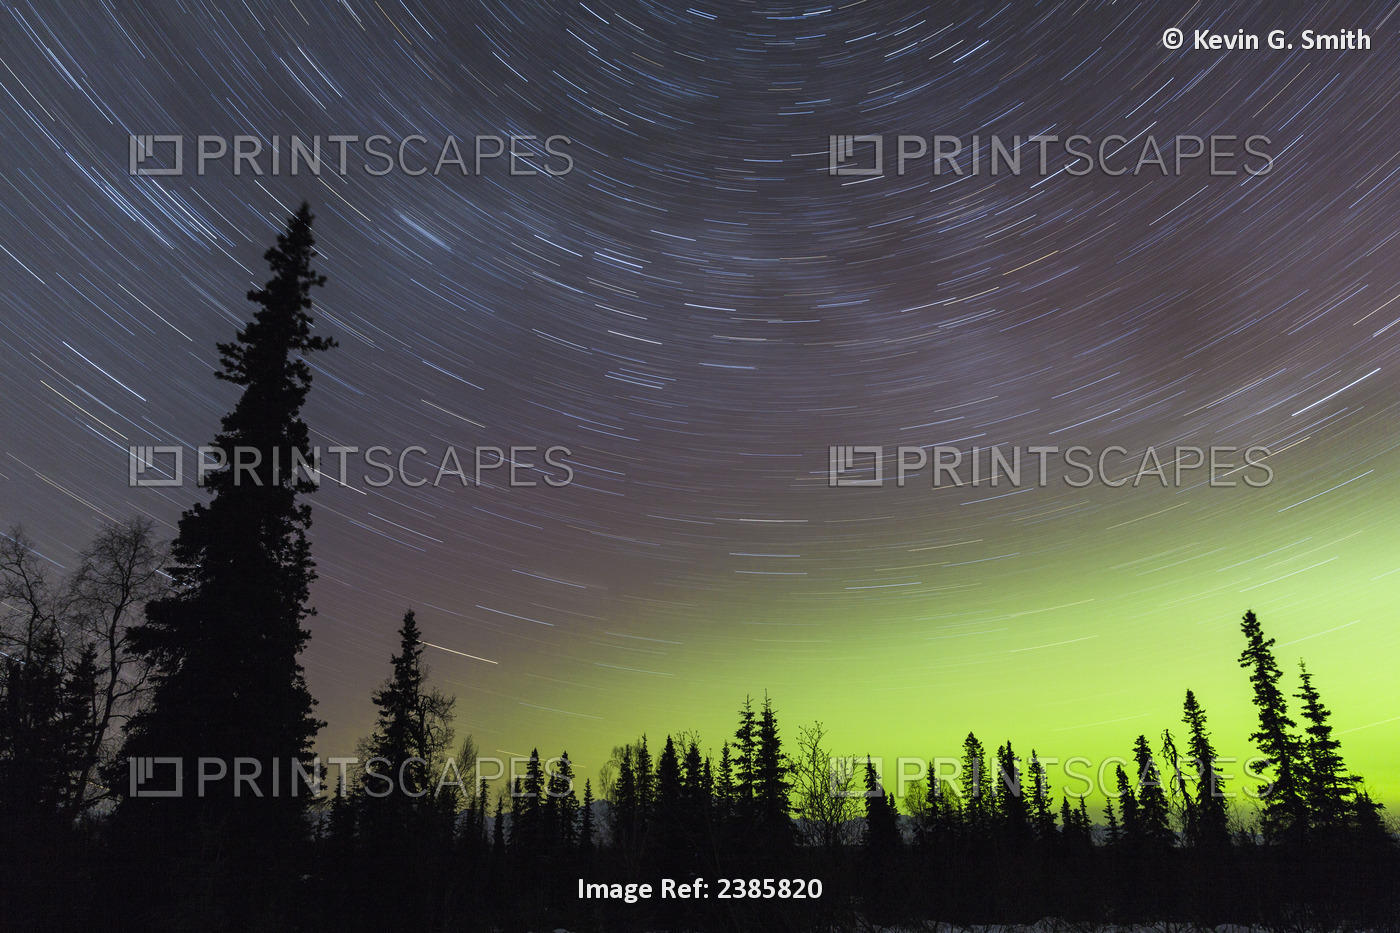 Northern Lights And Star Trails In The Sky With Silhouetted Trees In The ...